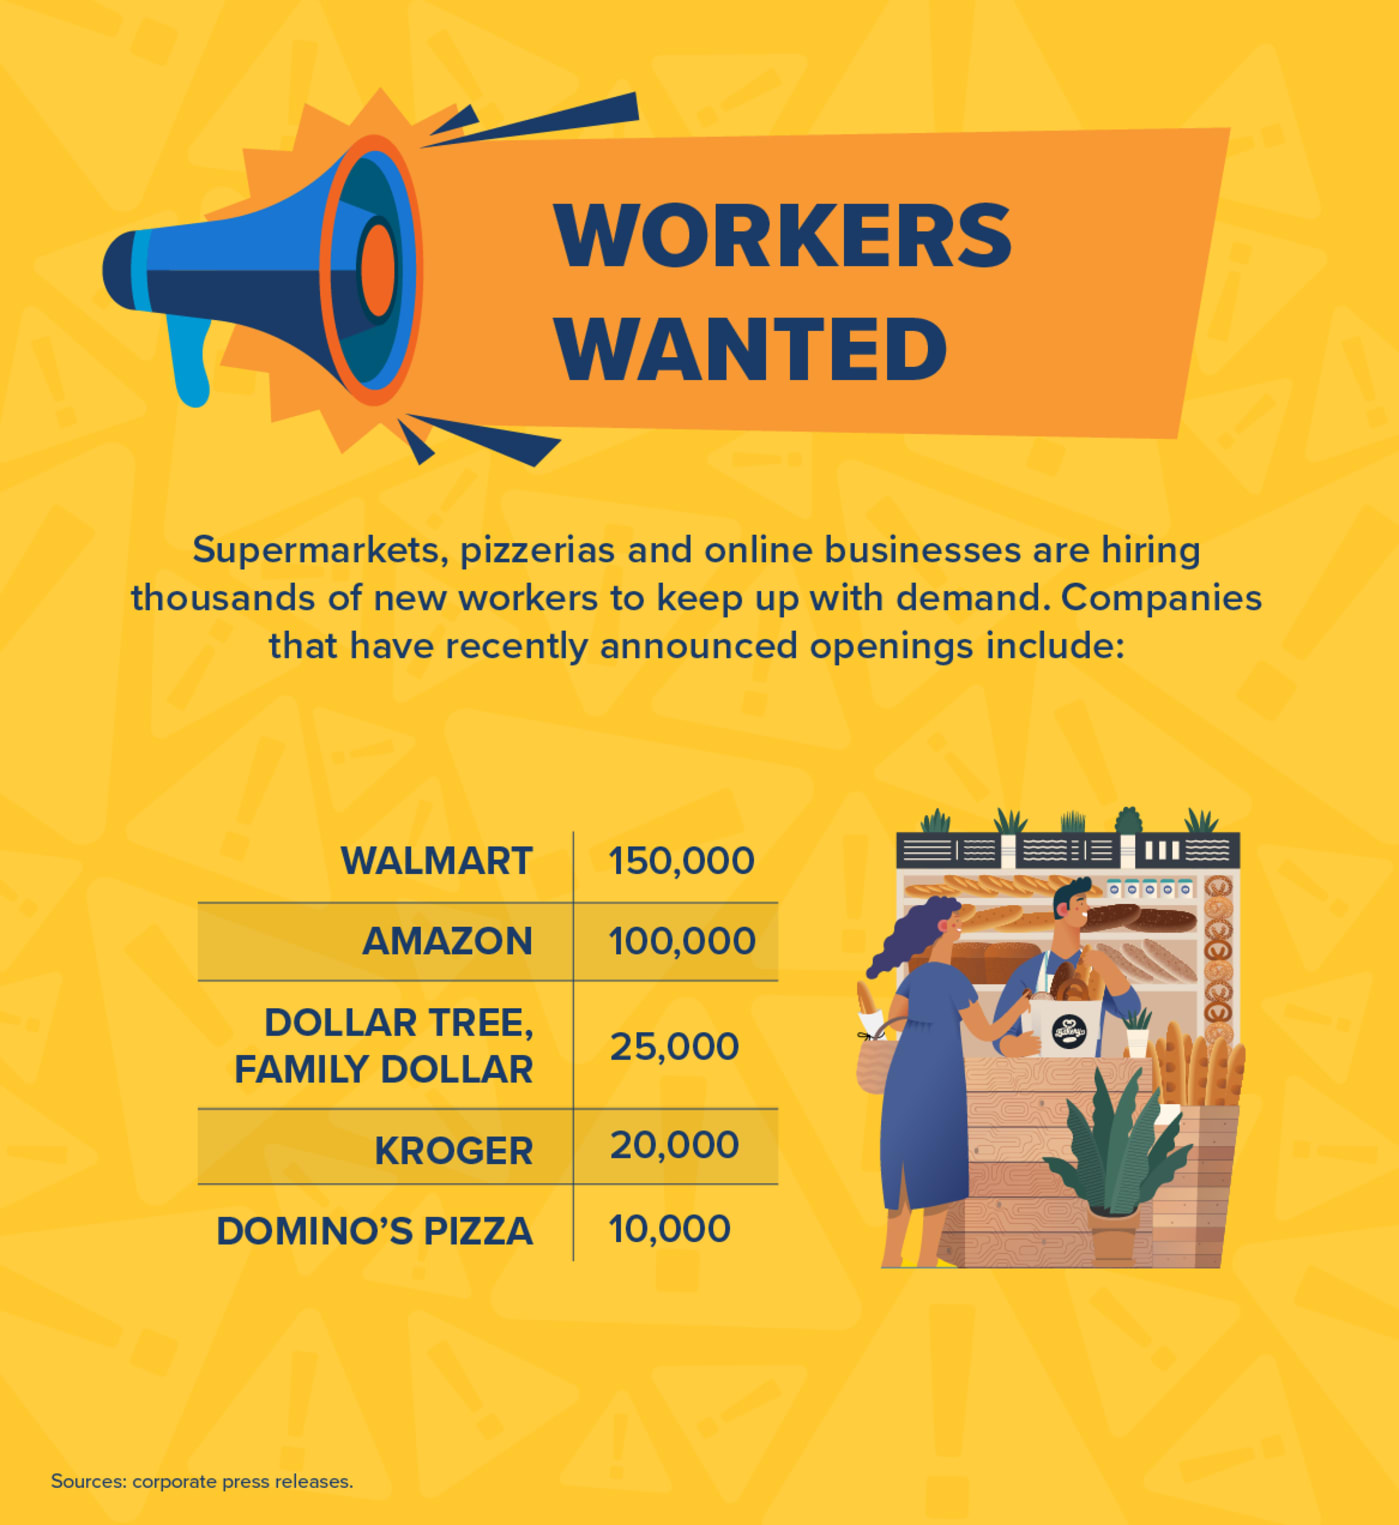 Workers Wanted